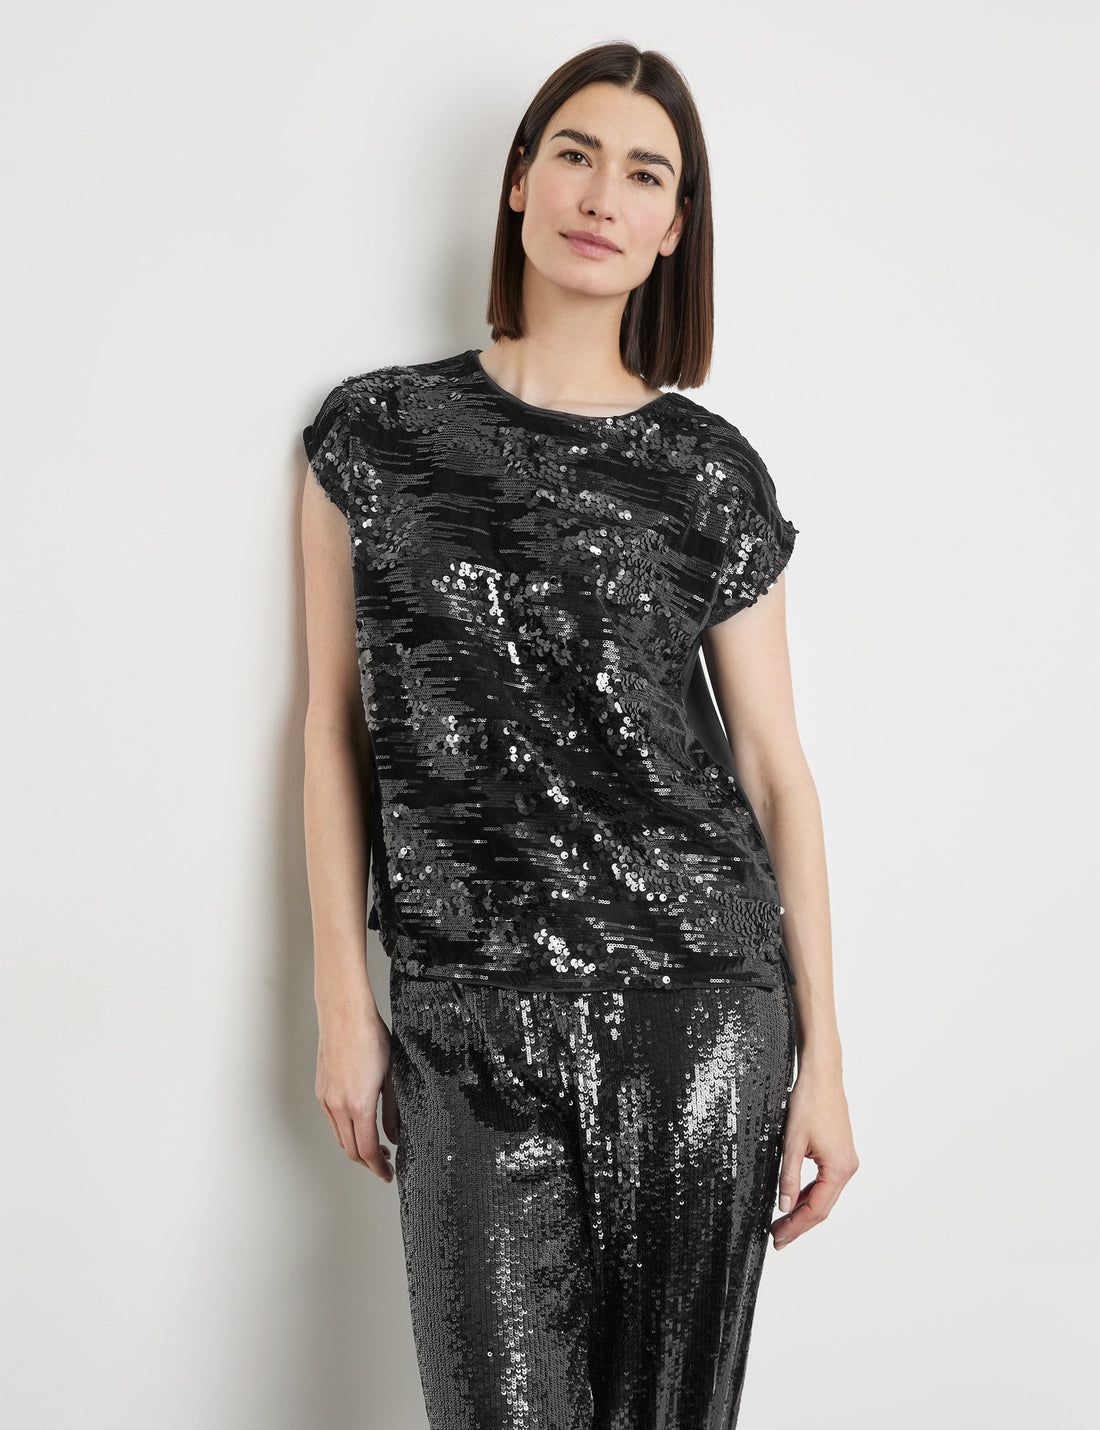 Elegant Top With Fabric Panelling And Sequin Embellishment_270249-35046_11000_01